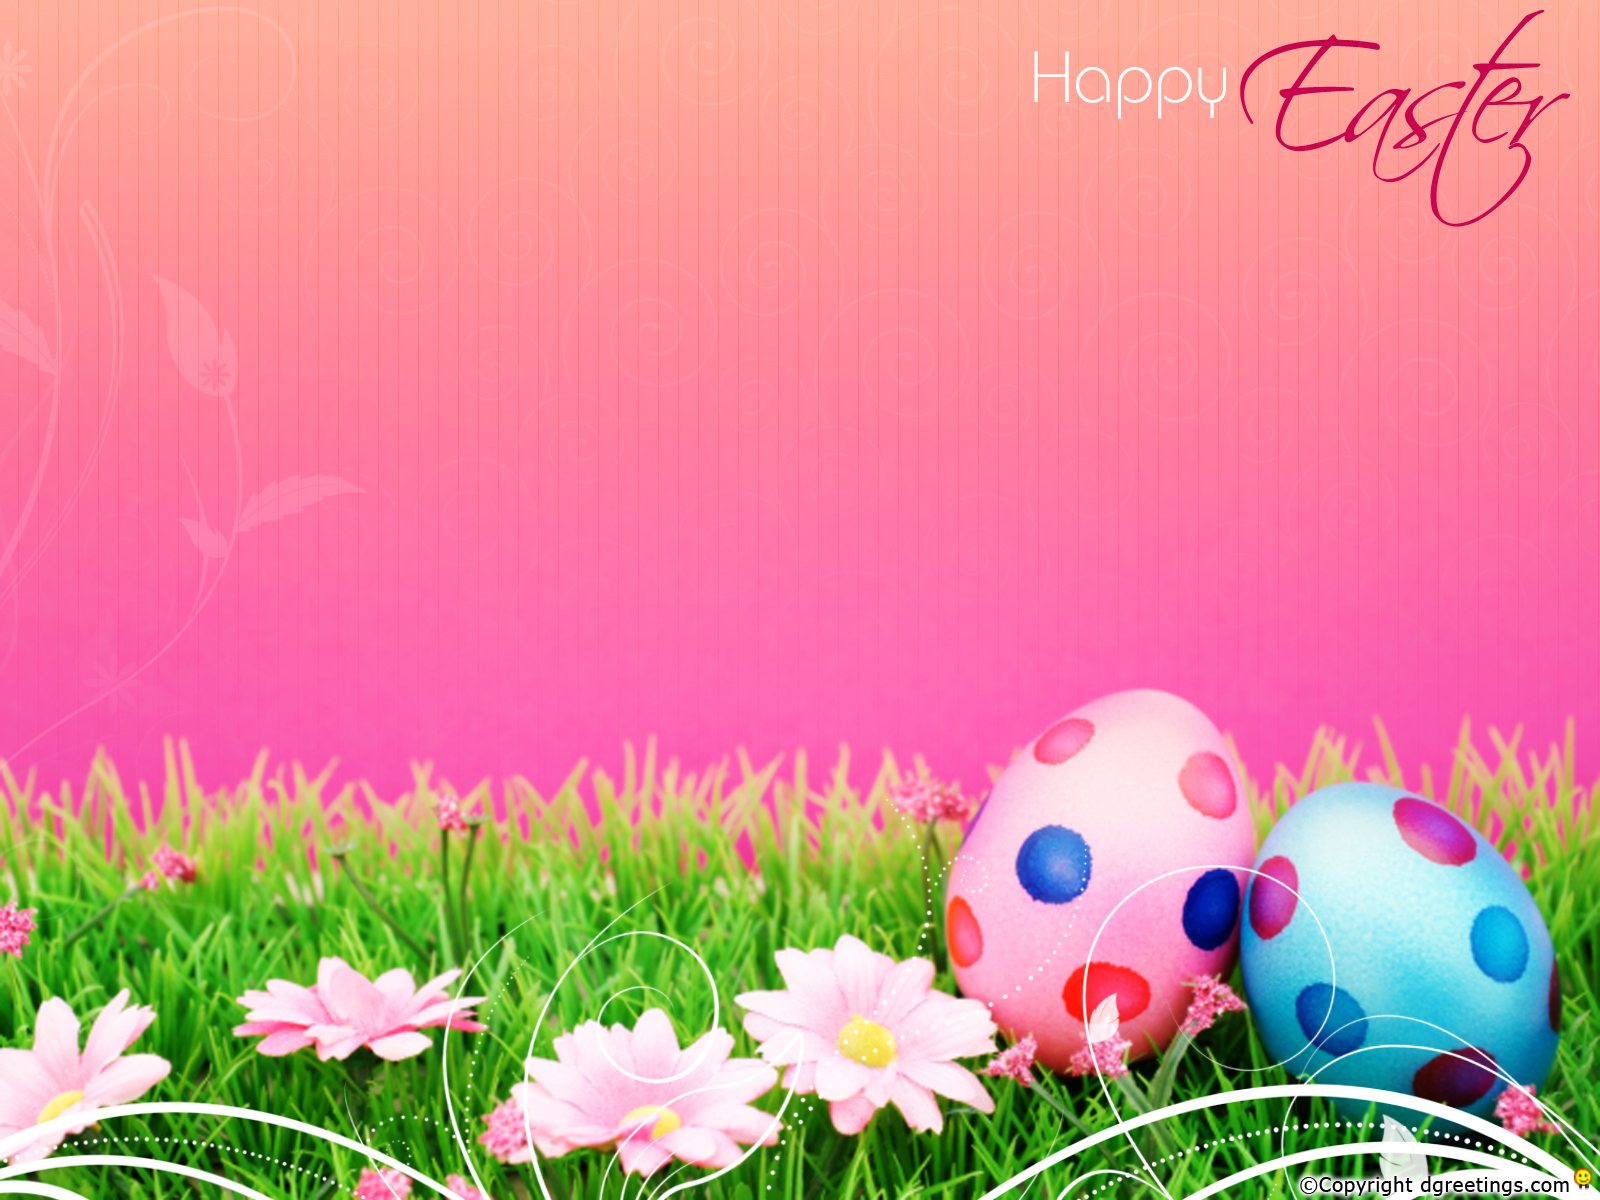 Cute Easter Backgrounds Images amp Pictures   Becuo